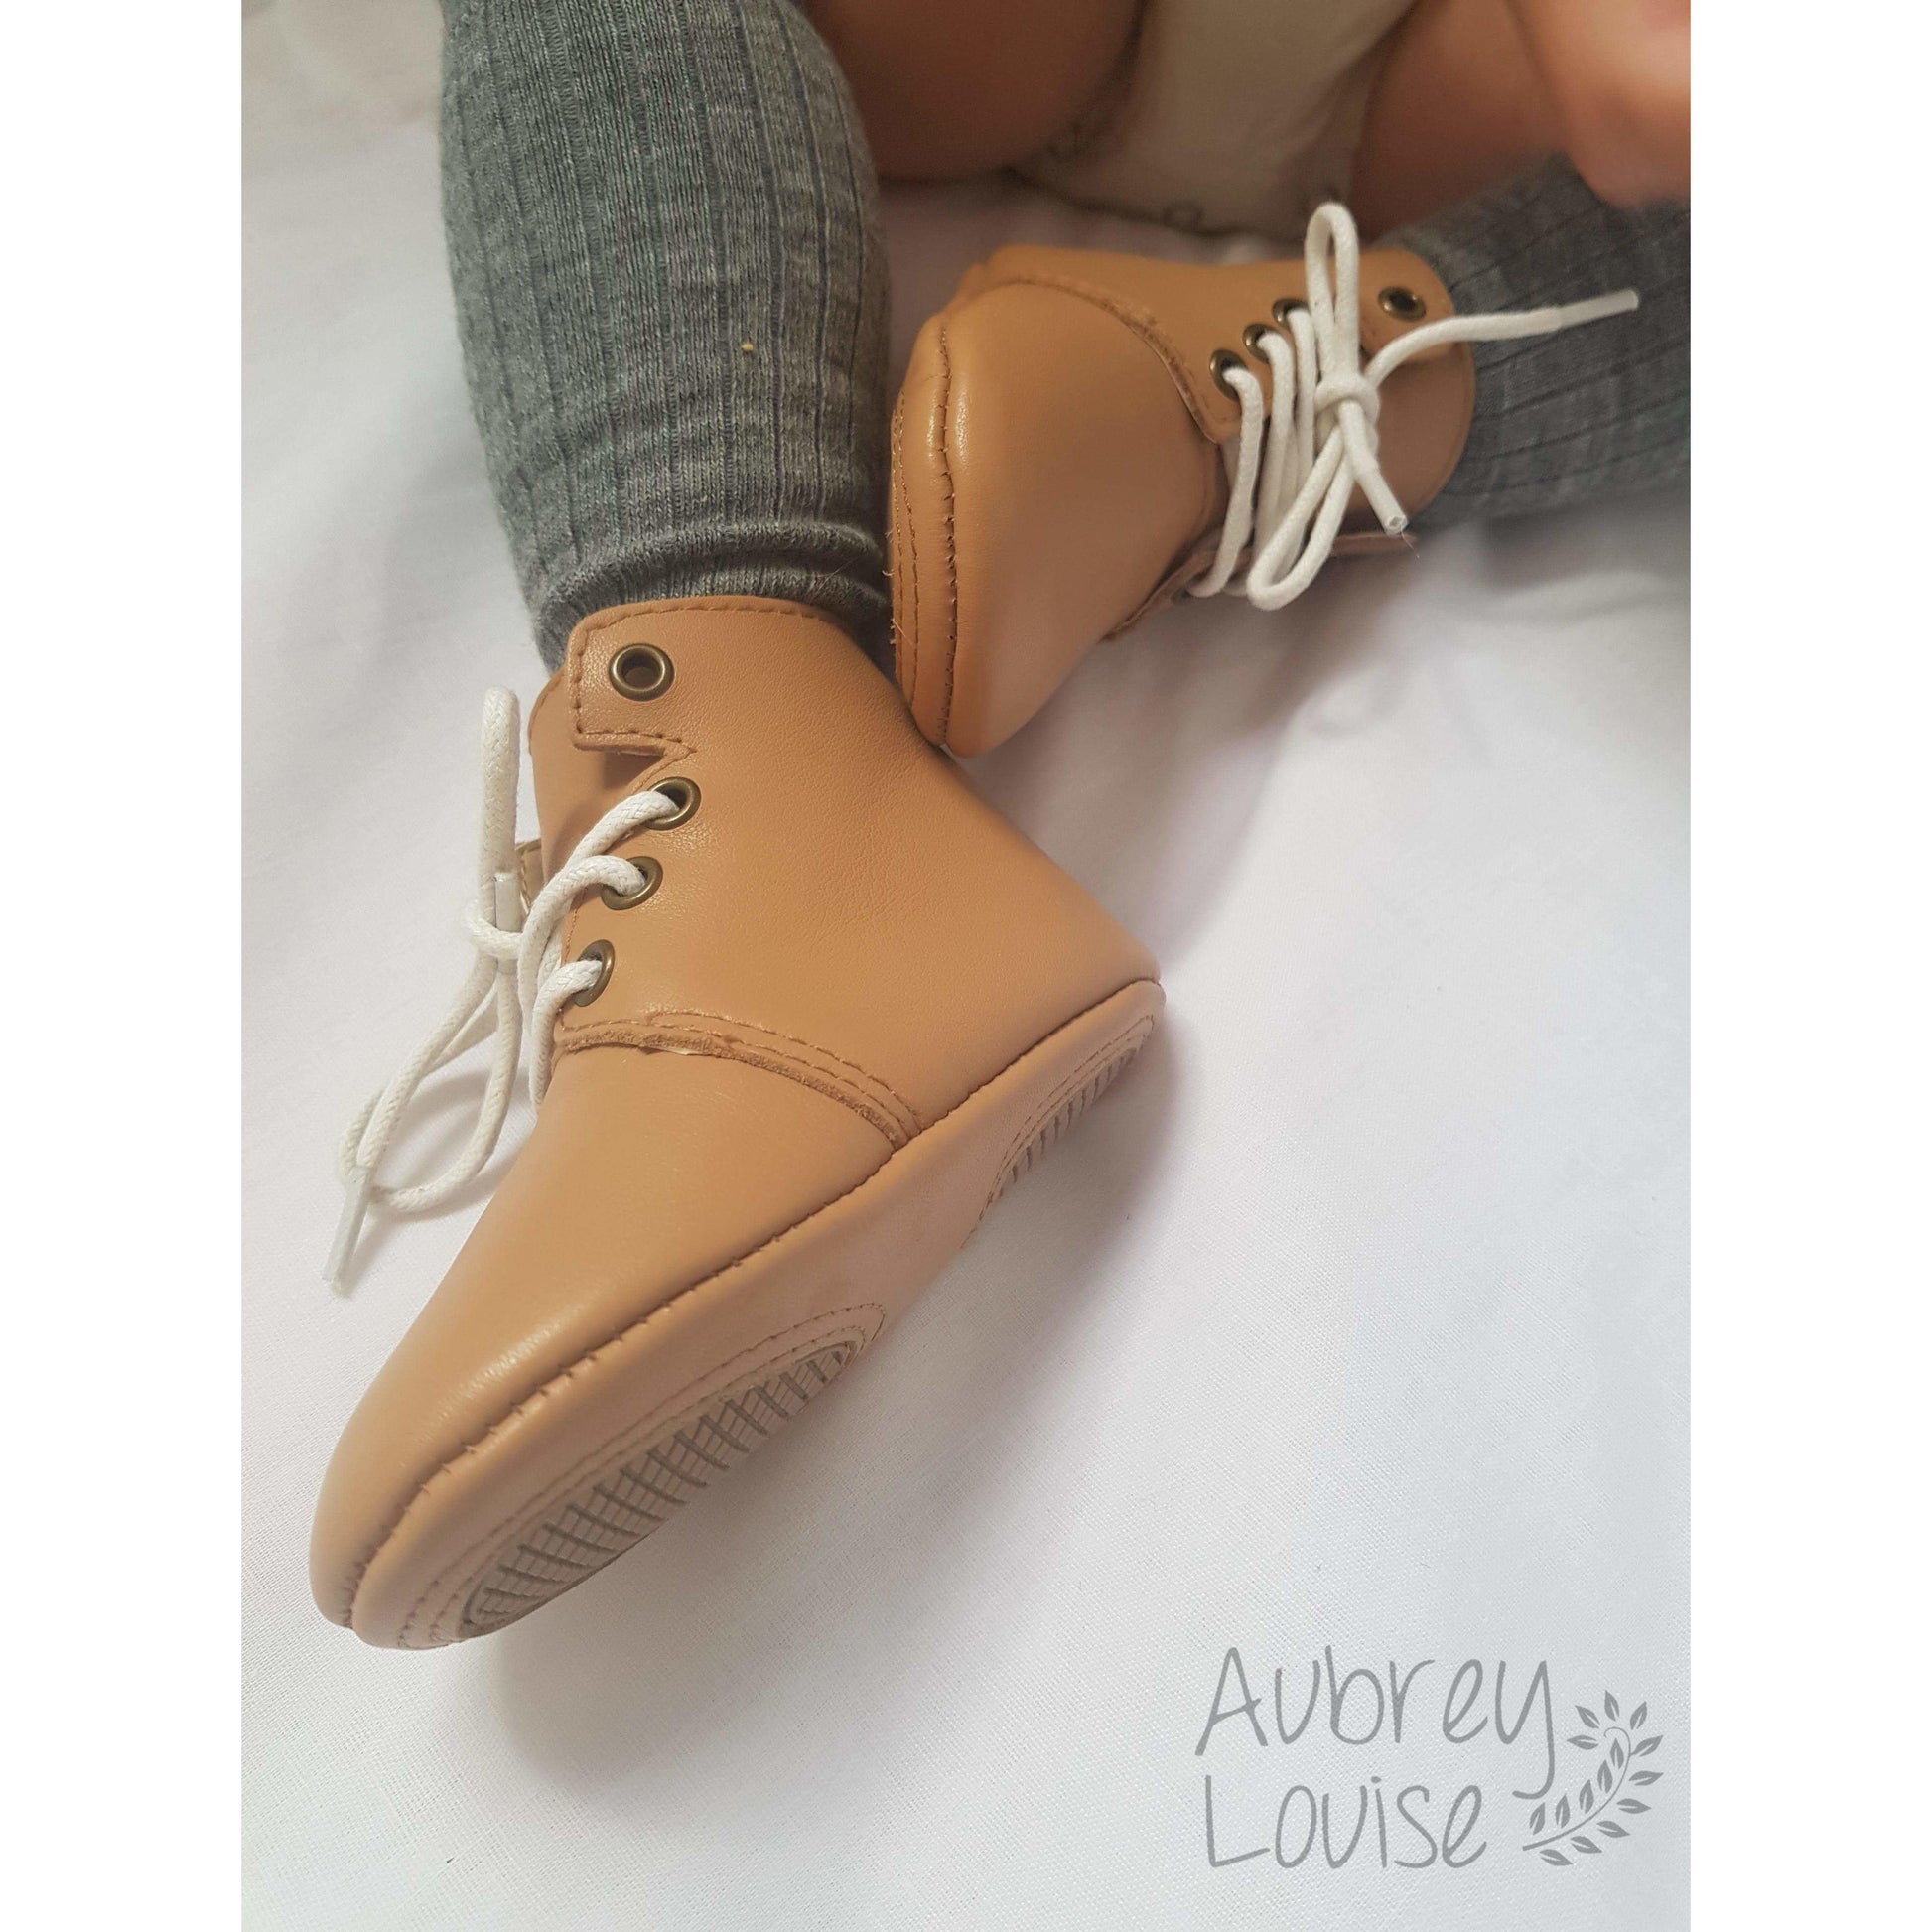 Aubrey Louise Shoes 2 / Brown Oxford Boot non-slip sole